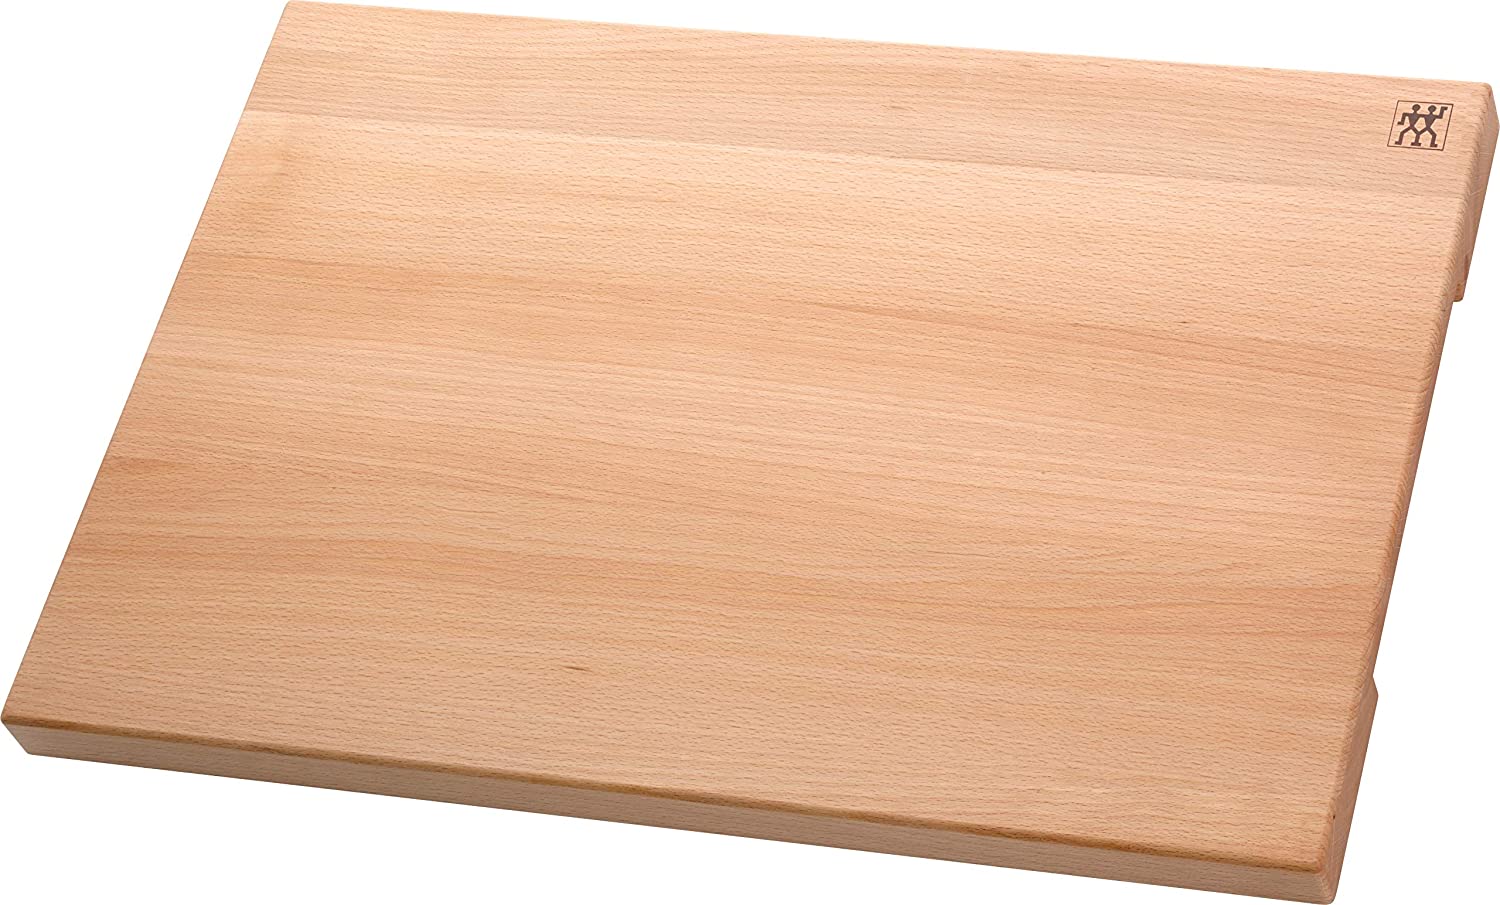 Zwilling 35118-100-0 Chopping Board, Solid Beech, Wood, Brown, 60 x 40 x 3.5 cm